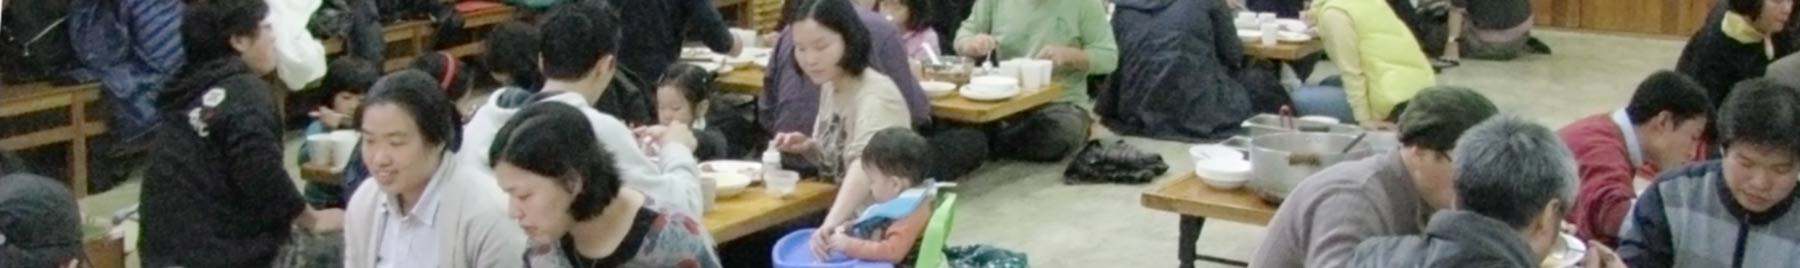 Photo of mealtime in Jesus Abbey